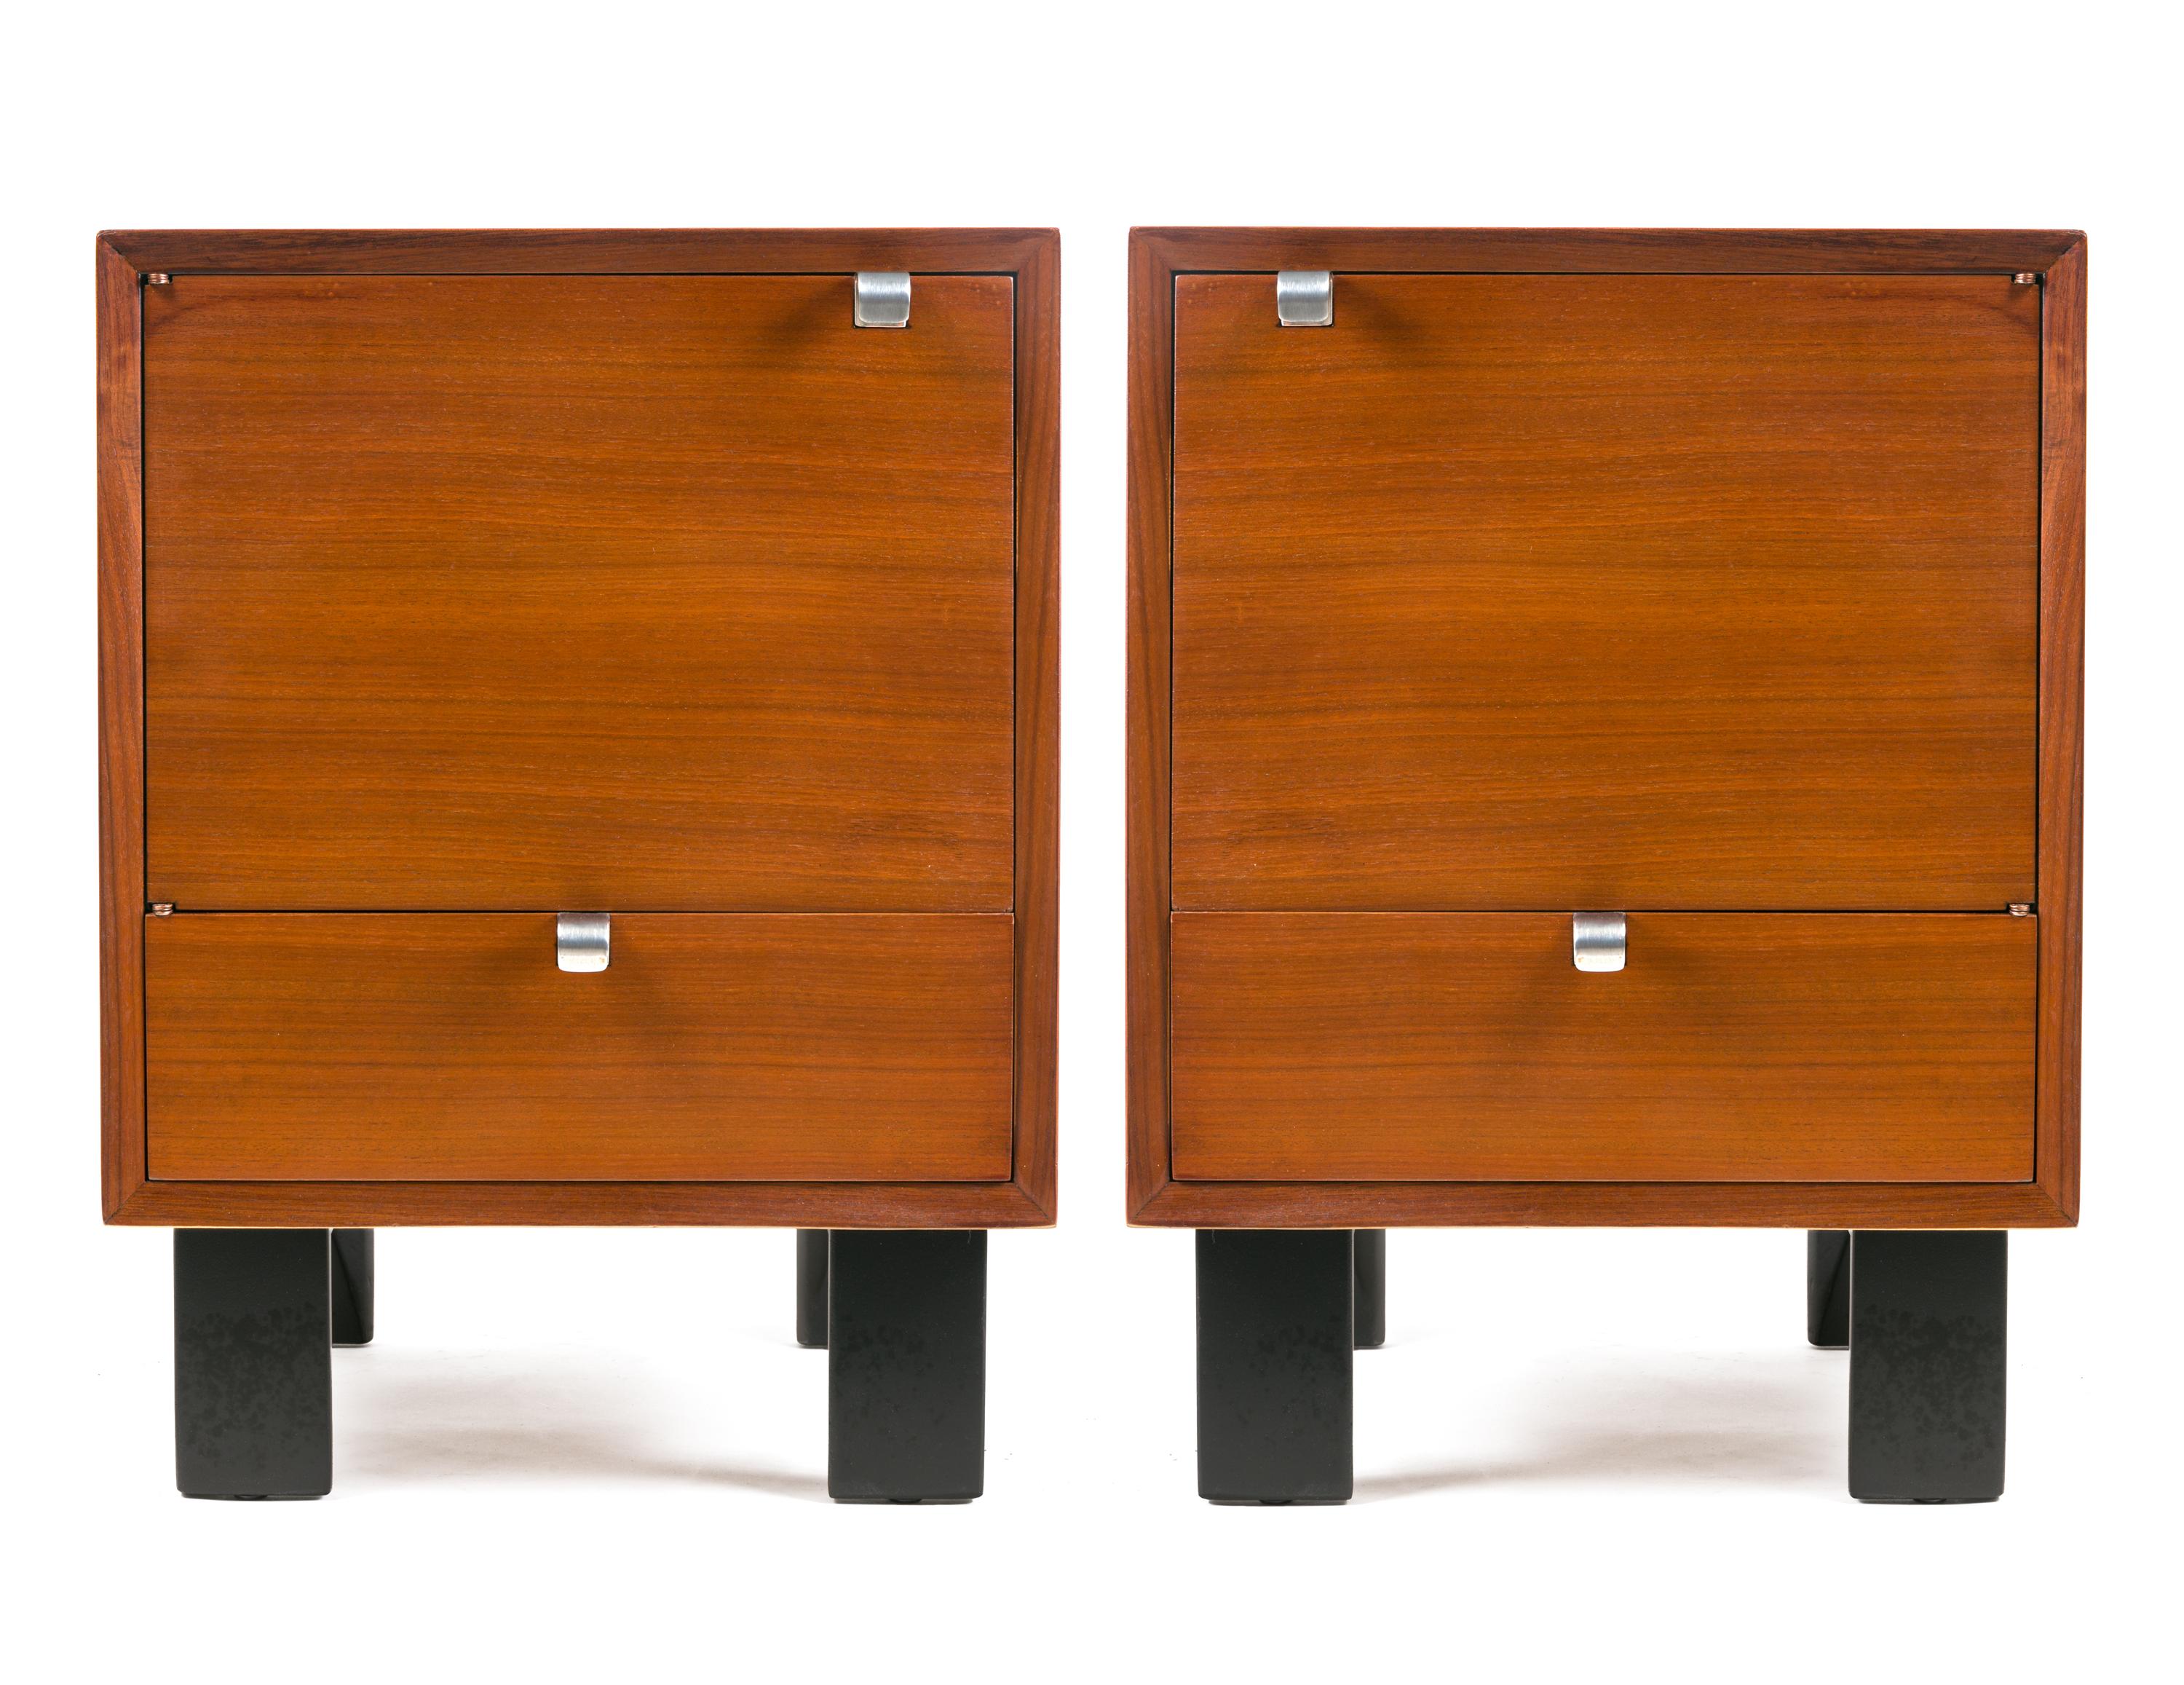 Like all of George Nelson designs these nightstands are both exceptionally good looking and very functional.